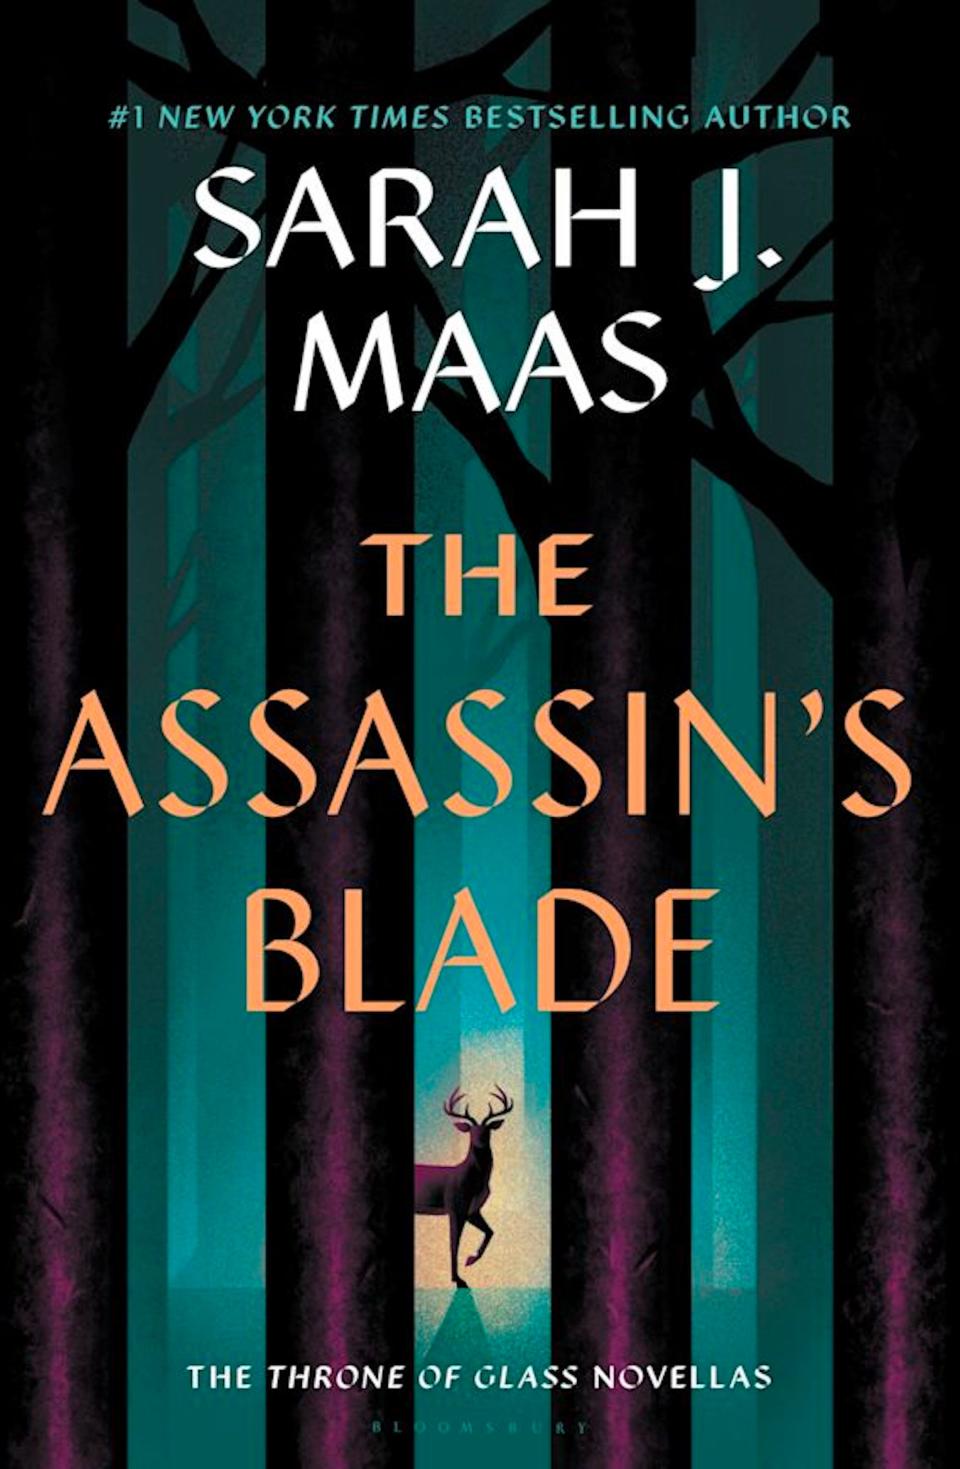 "The Assassin's Blade" by Sarah J. Maas.